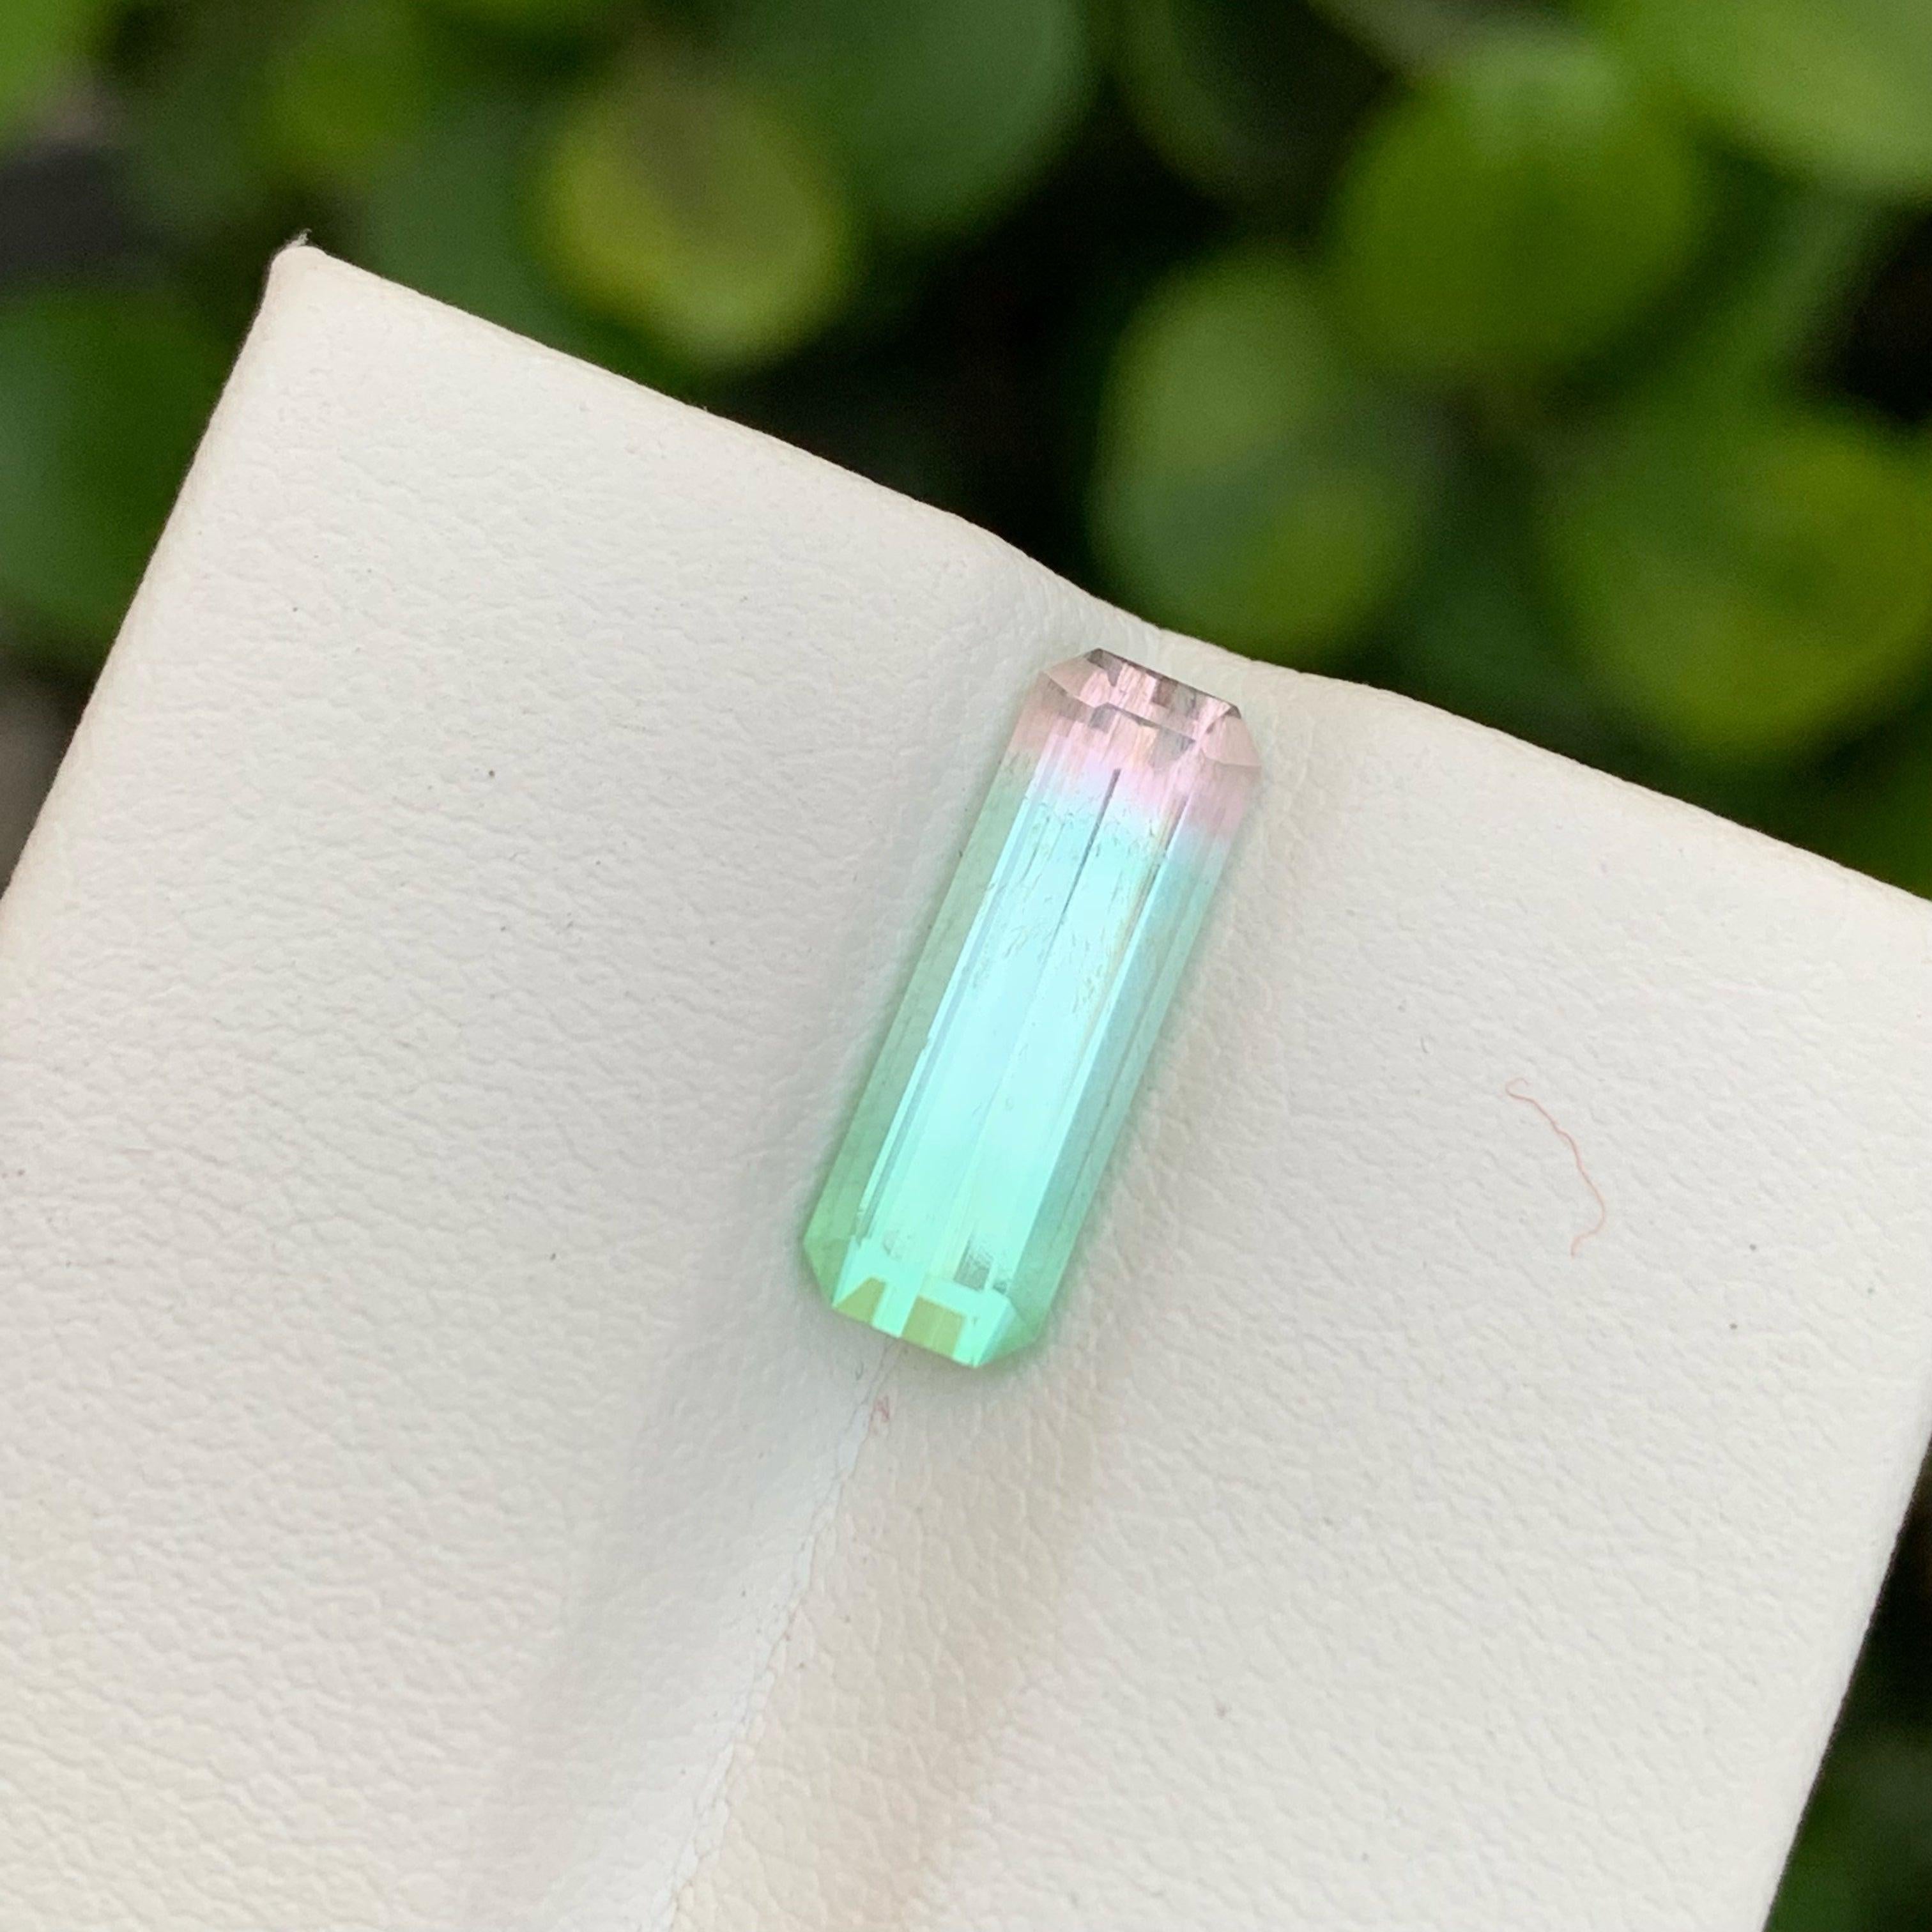 Modern Beautiful Bicolor Loose Tourmaline Gemstone 3.25 CTS Tourmaline From Afghanistan For Sale